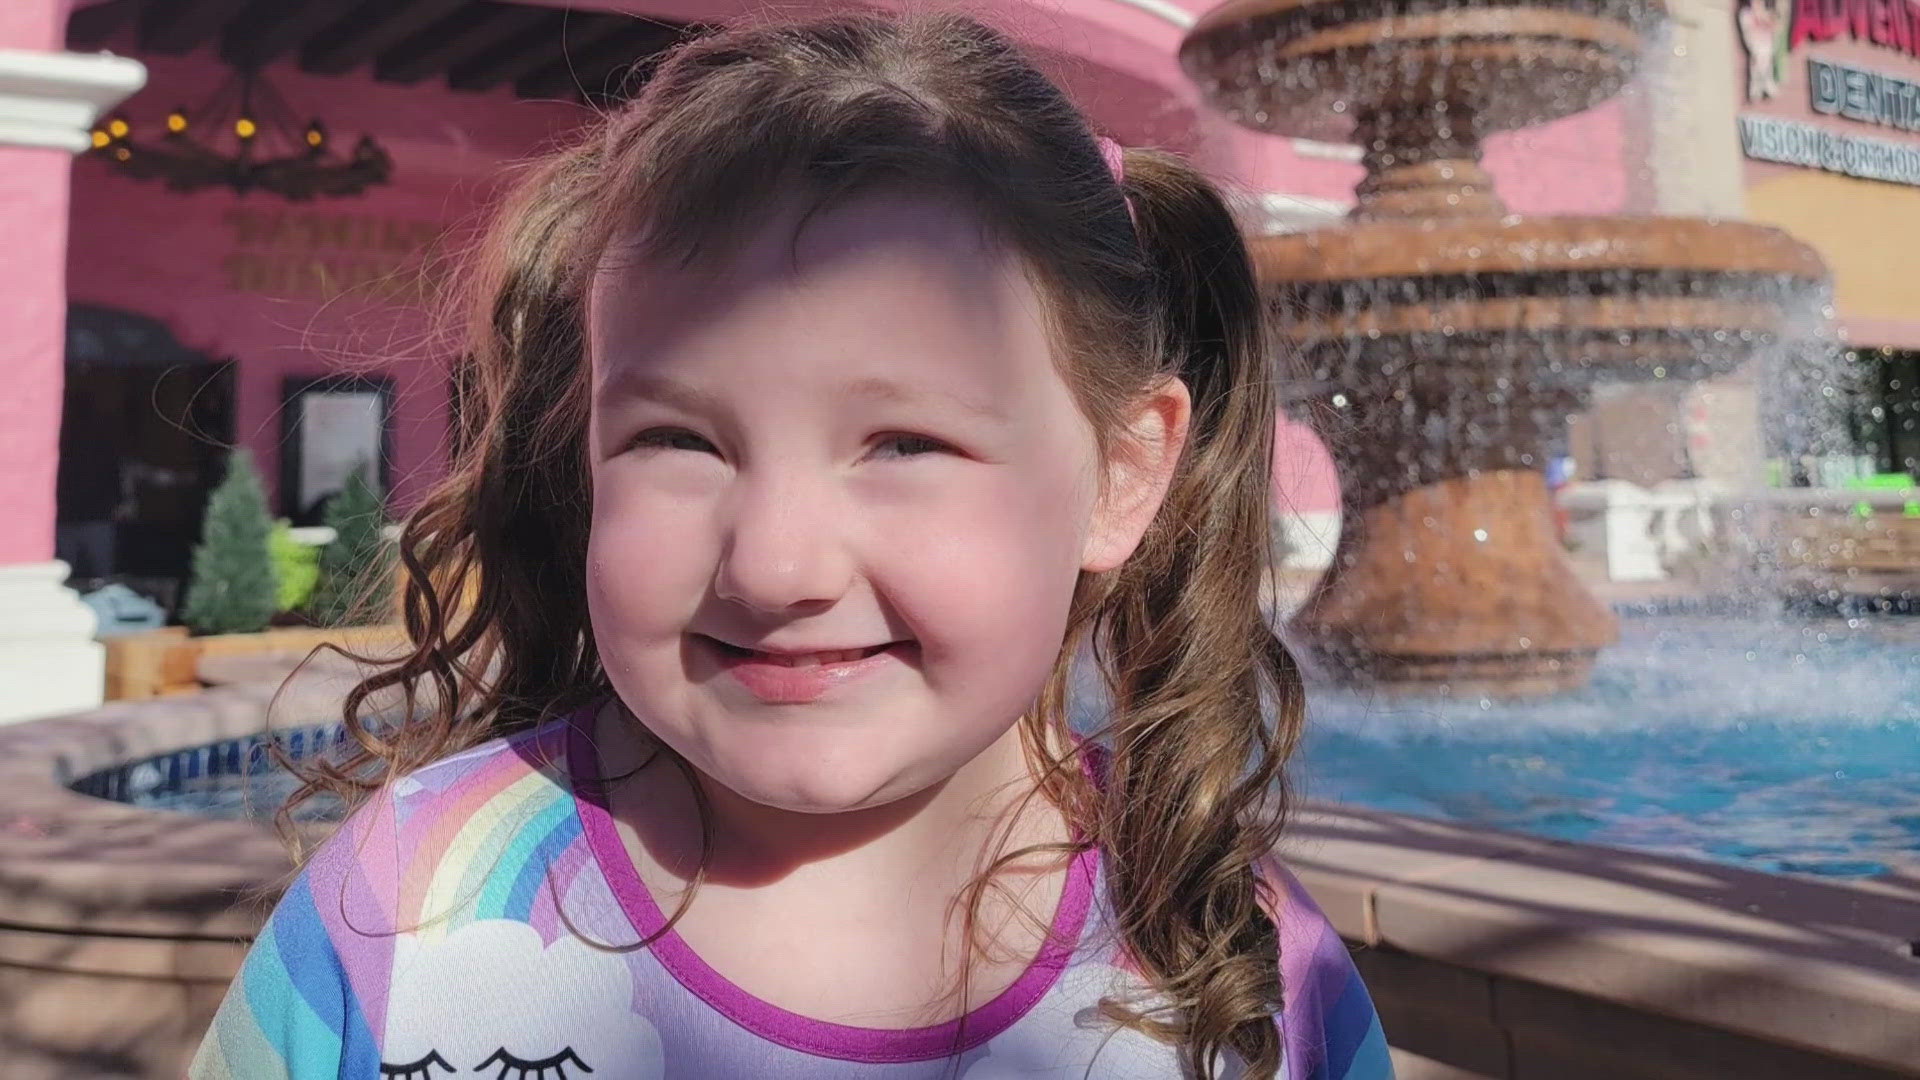 Aurora Masters was playing outside when she died in a freak accident. Her parents are hoping their story will start a conversation and ultimately save lives.